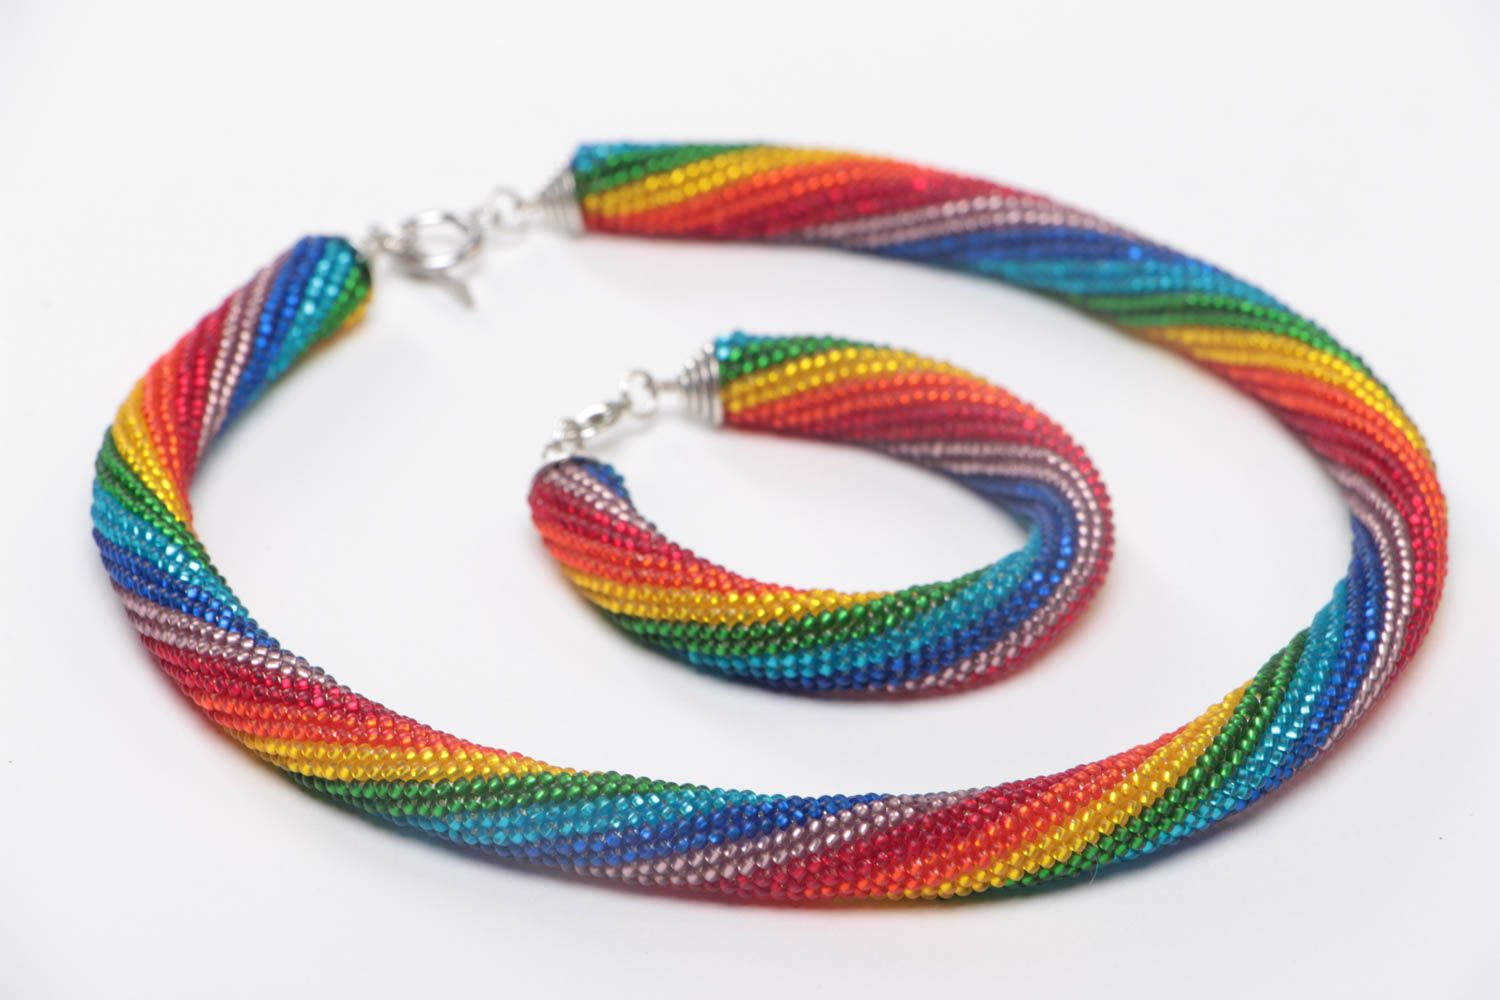 Handmade beaded cord jewelry set of rainbow coloring necklace and wrist bracelet photo 3